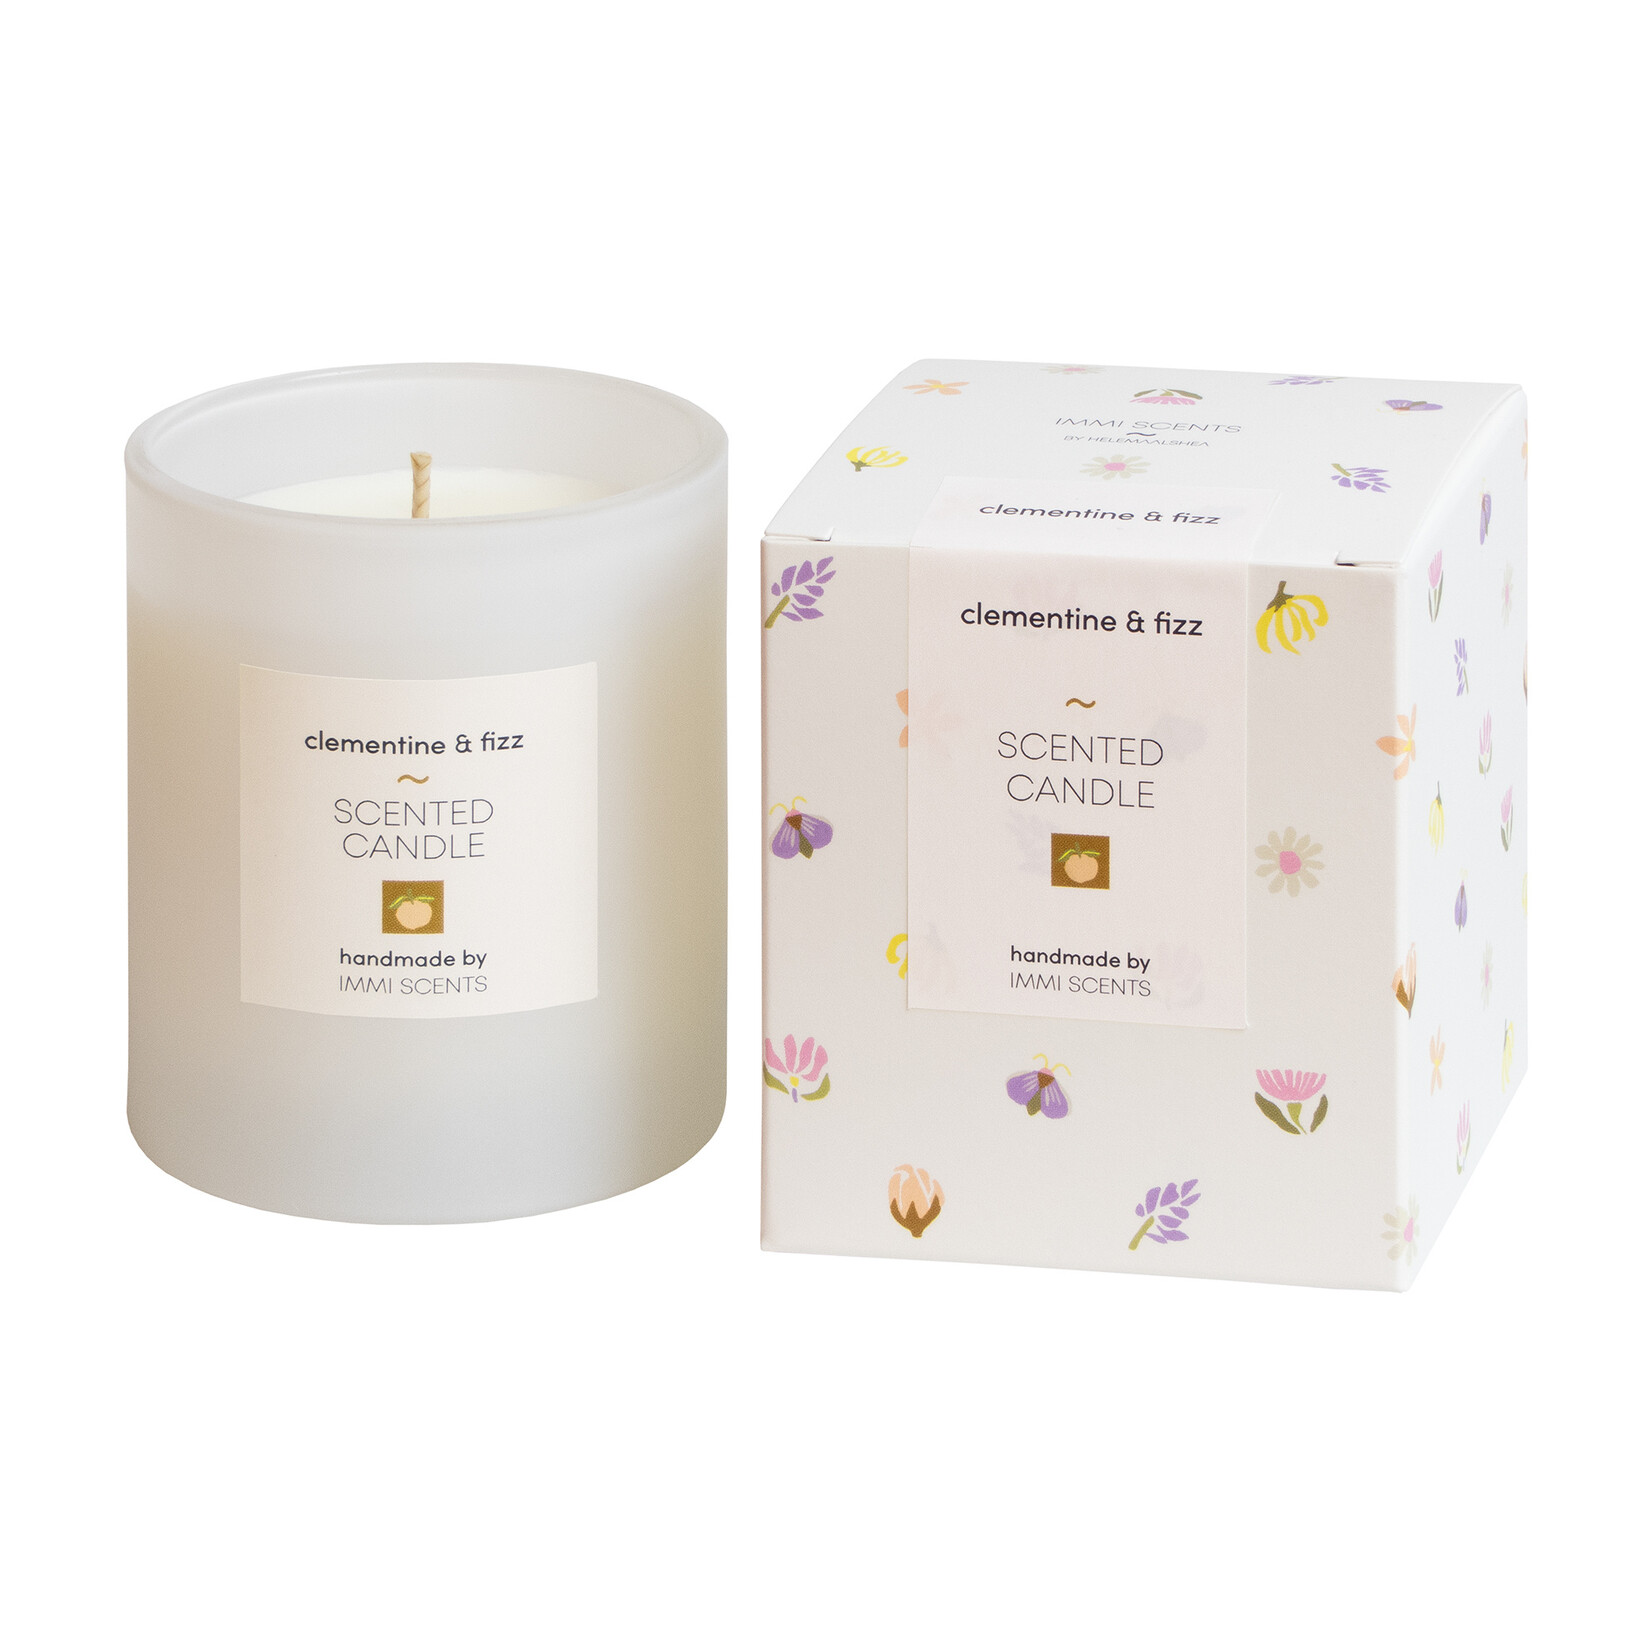 Scented candle - Clementine & Fizz - white